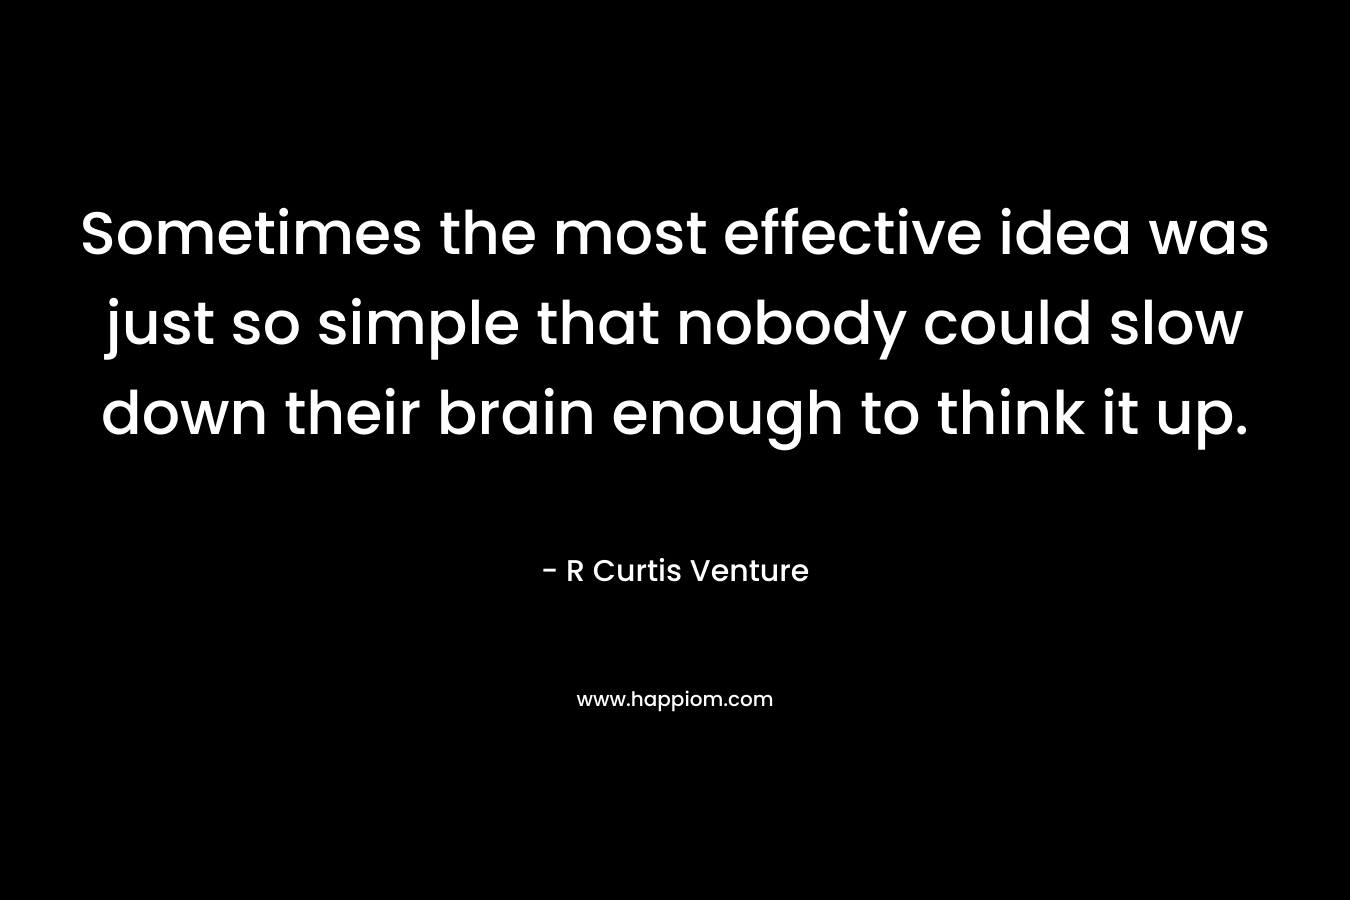 Sometimes the most effective idea was just so simple that nobody could slow down their brain enough to think it up.